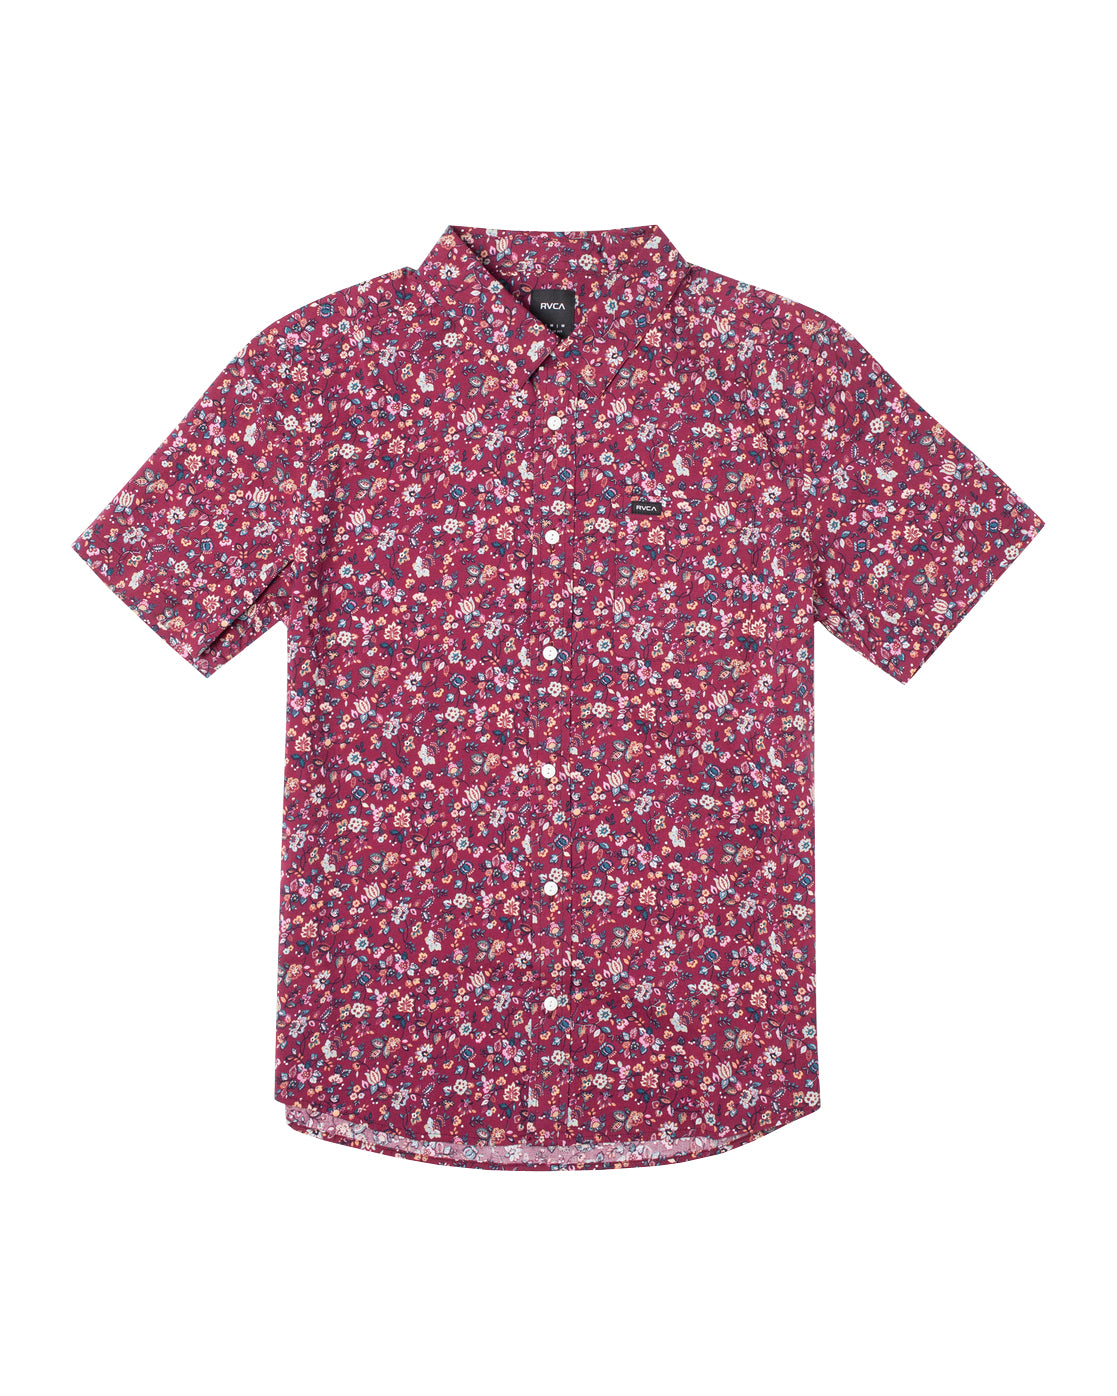 RVCA Justice Floral SS Woven Tee